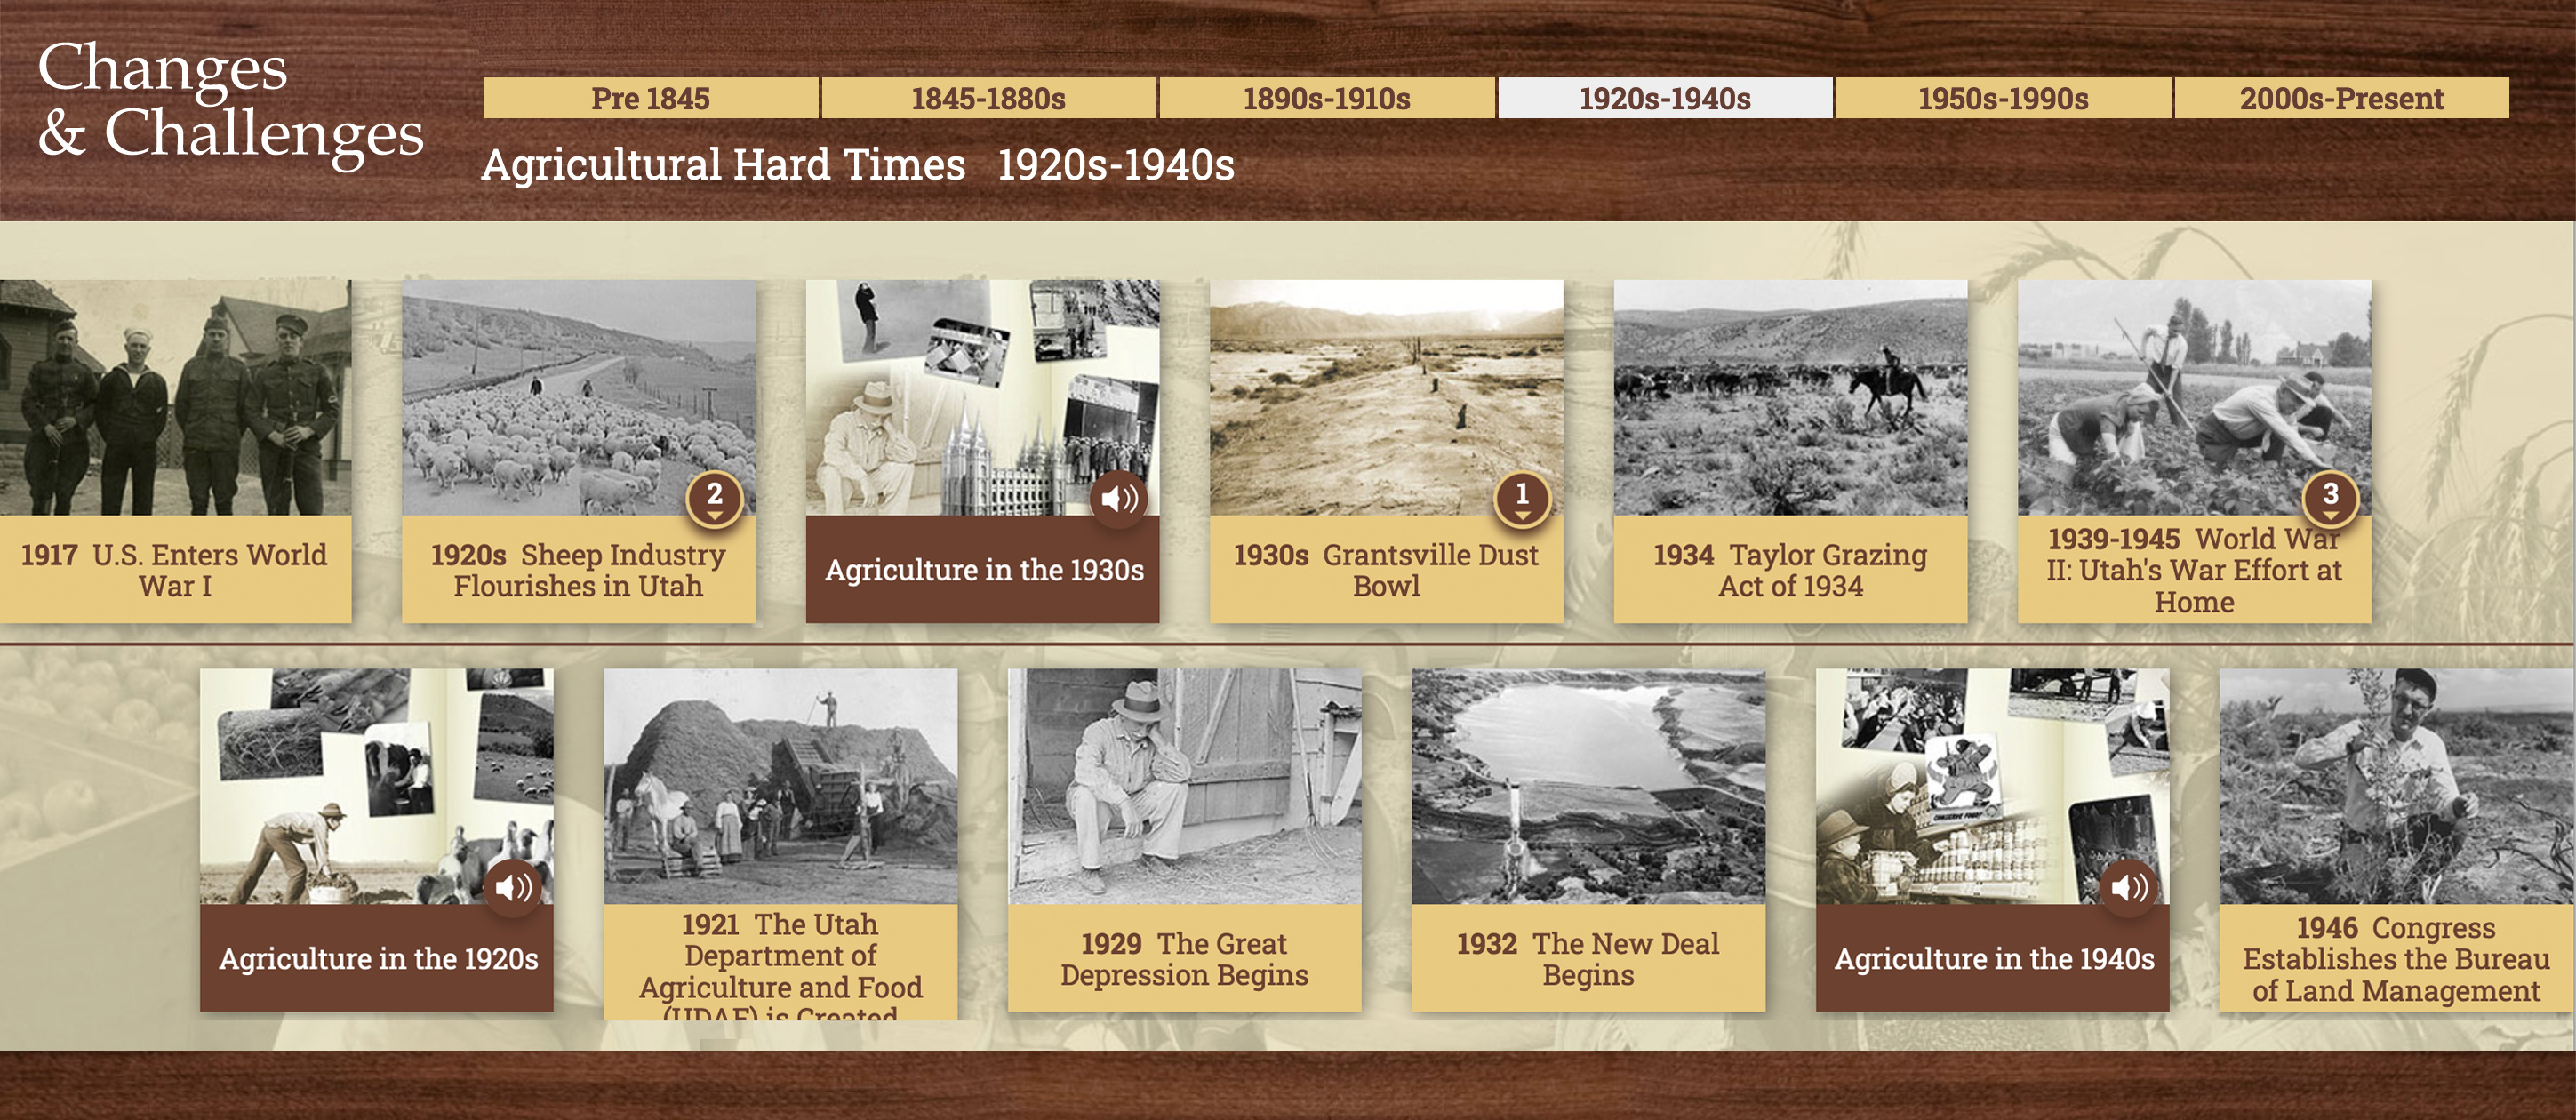 1920s-1930s: Agricultural Hard Times and The Great Depression